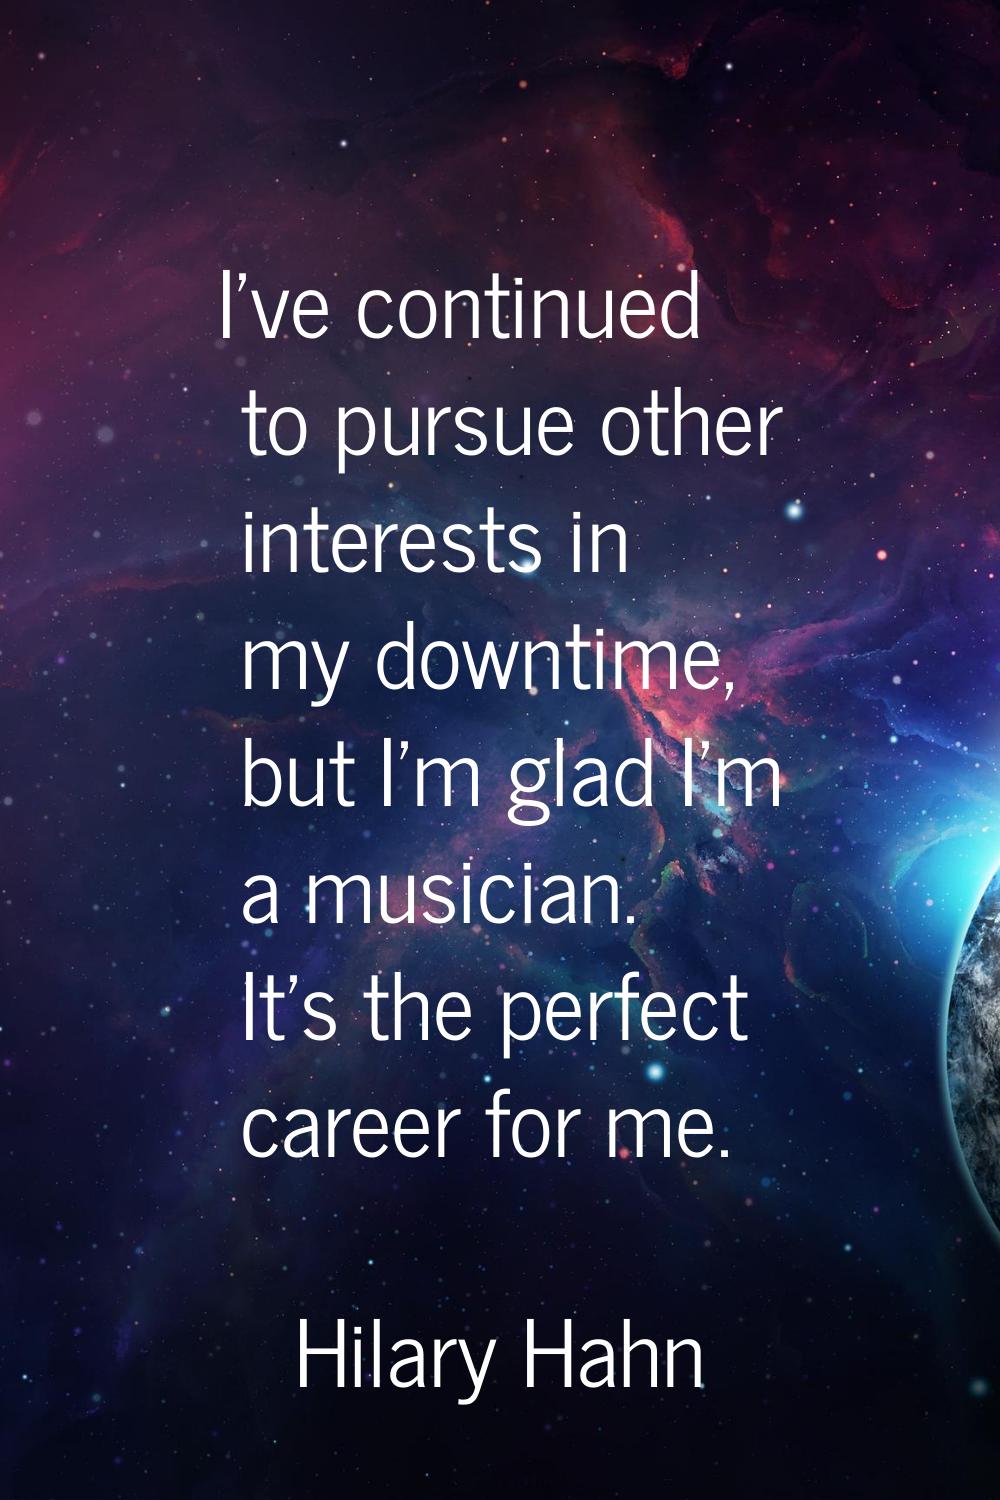 I've continued to pursue other interests in my downtime, but I'm glad I'm a musician. It's the perf